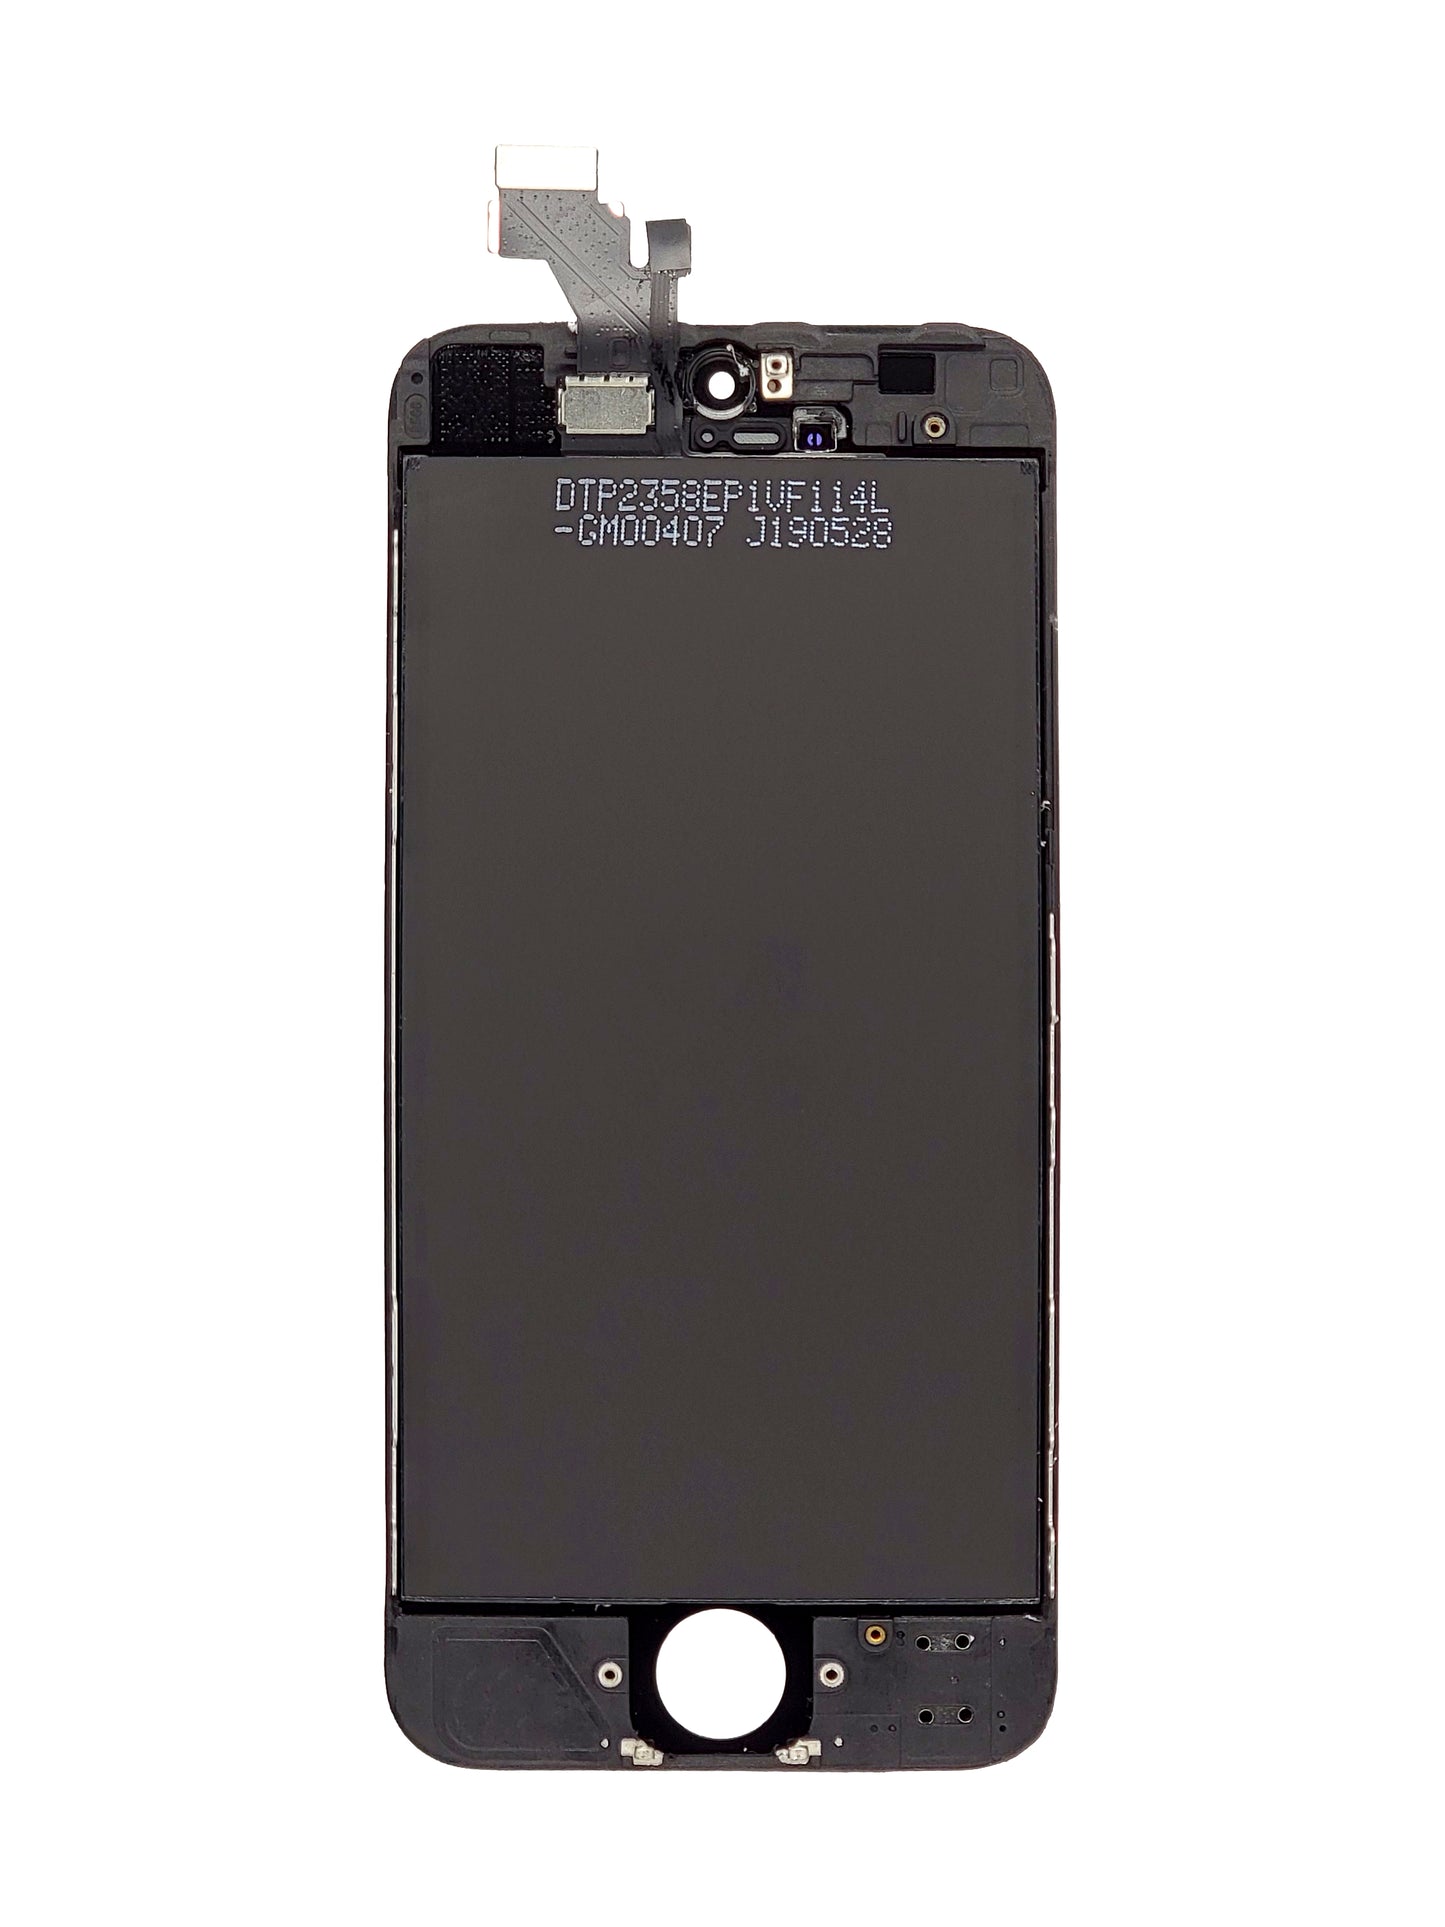 iPhone 5 LCD Assembly (Aftermarket) (Black)